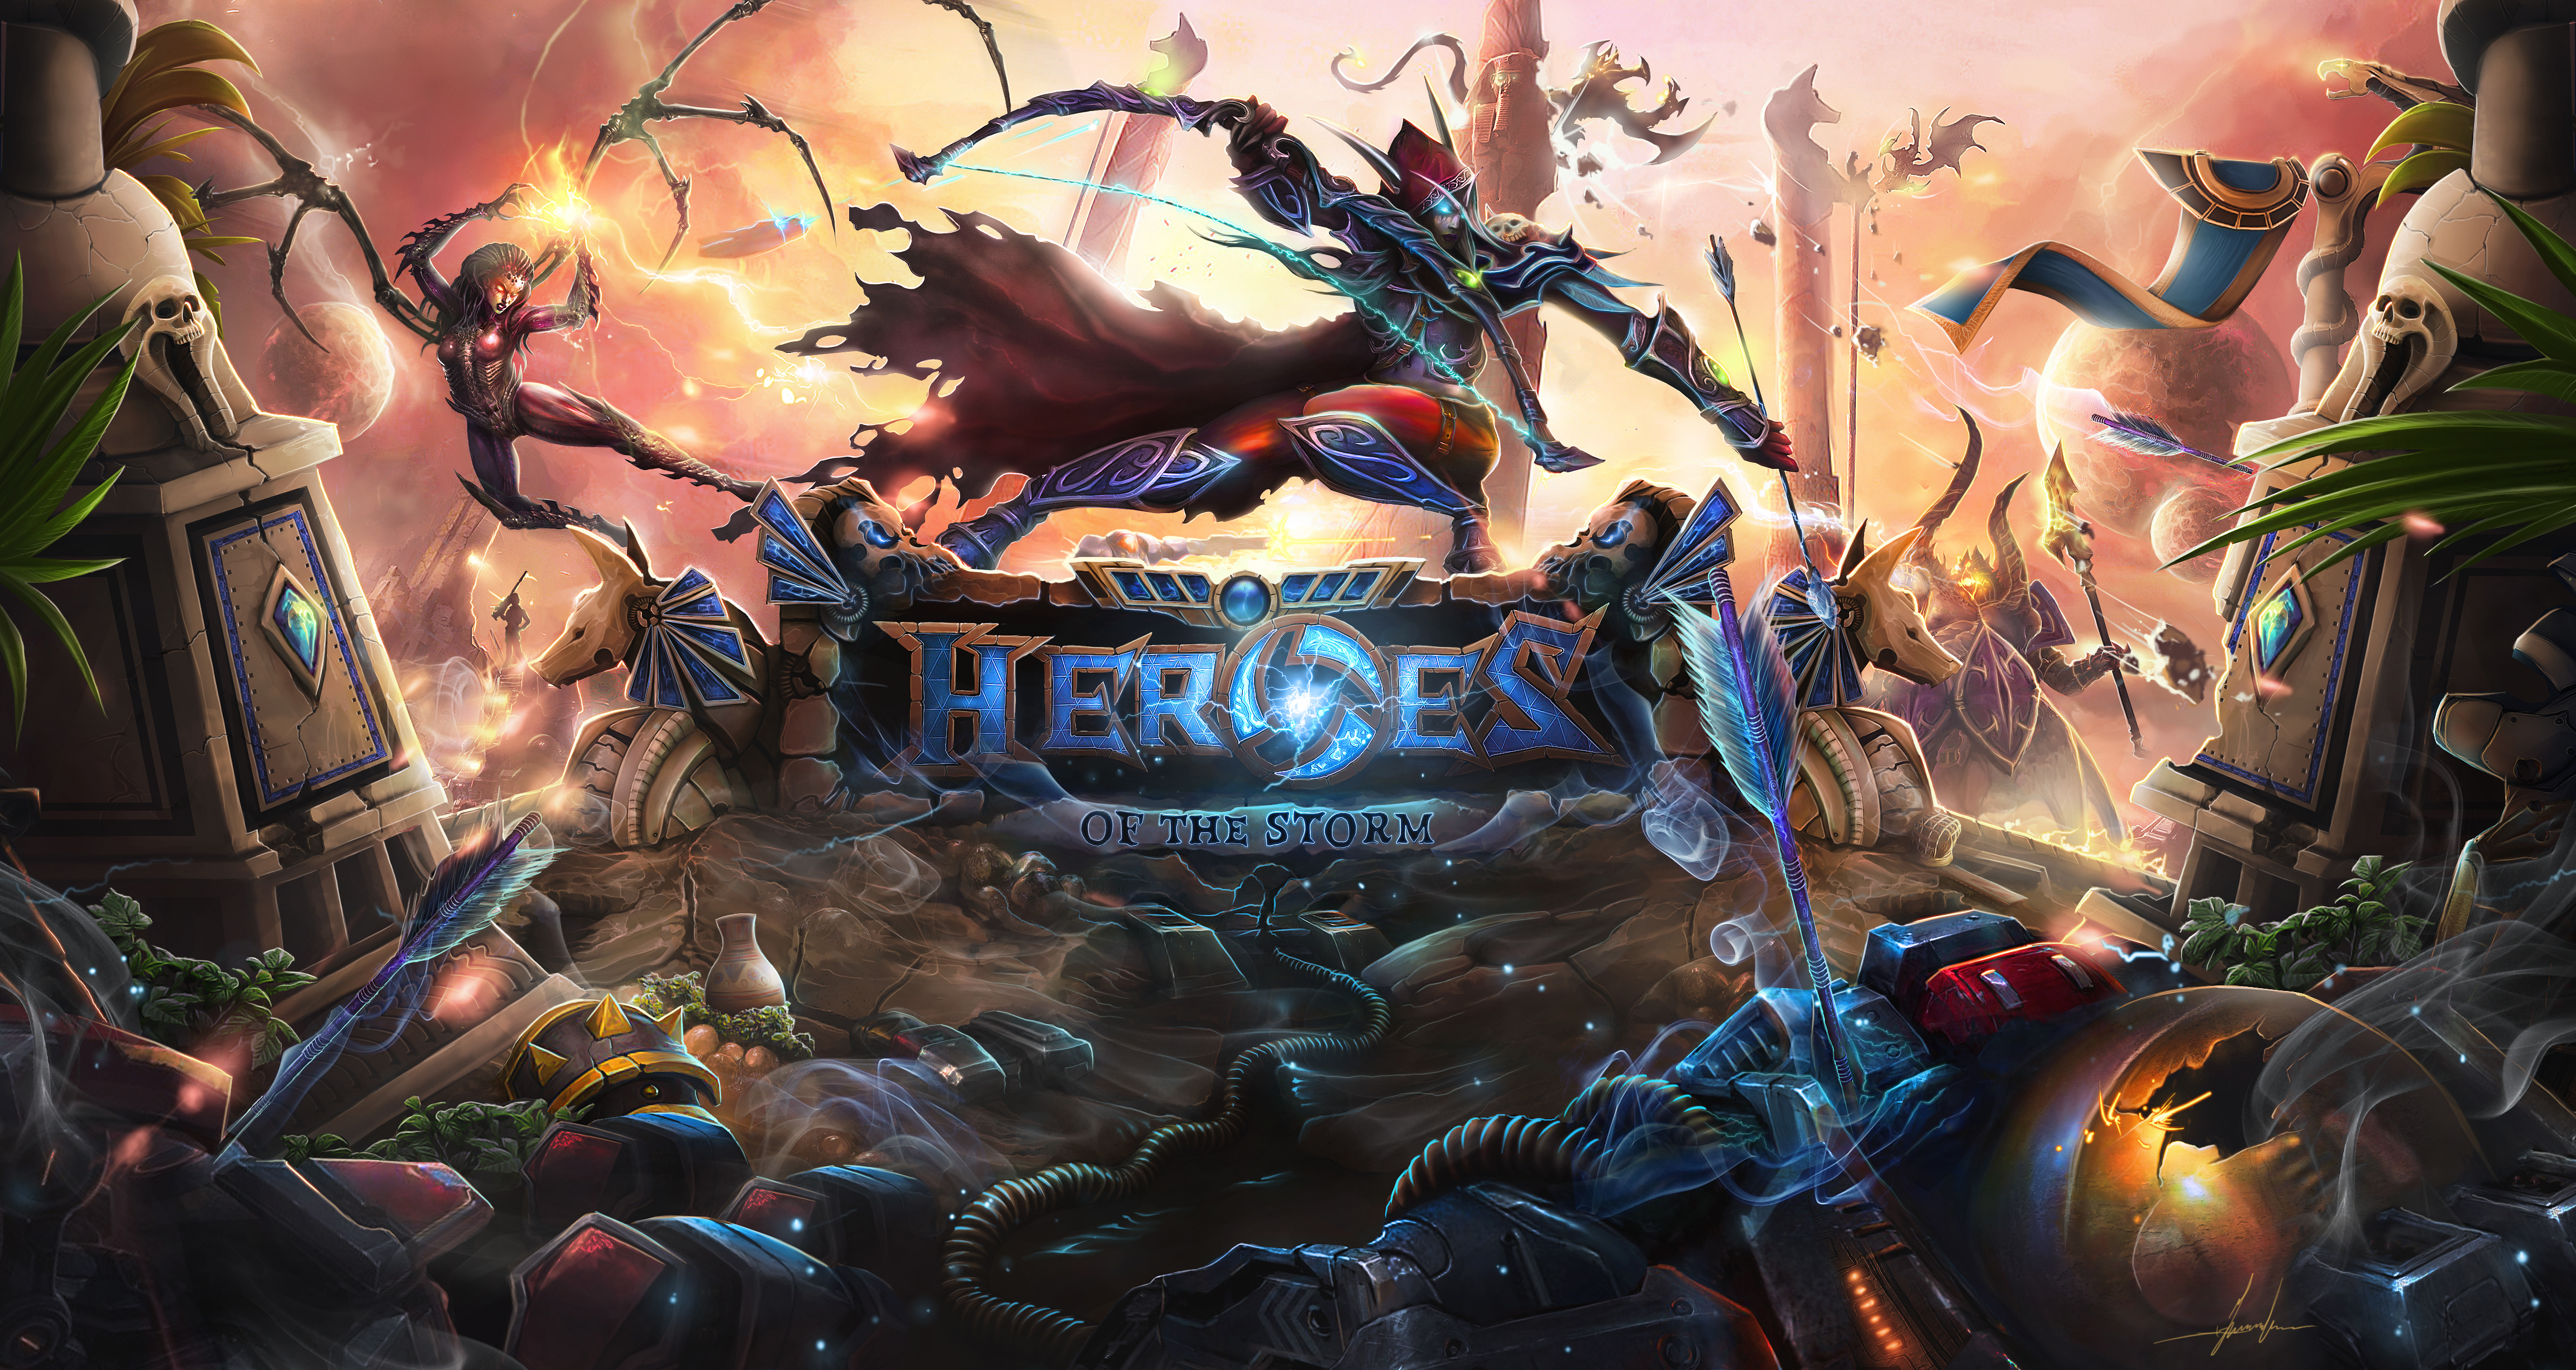 Heroes Of The Storm - Heroes of the Storm